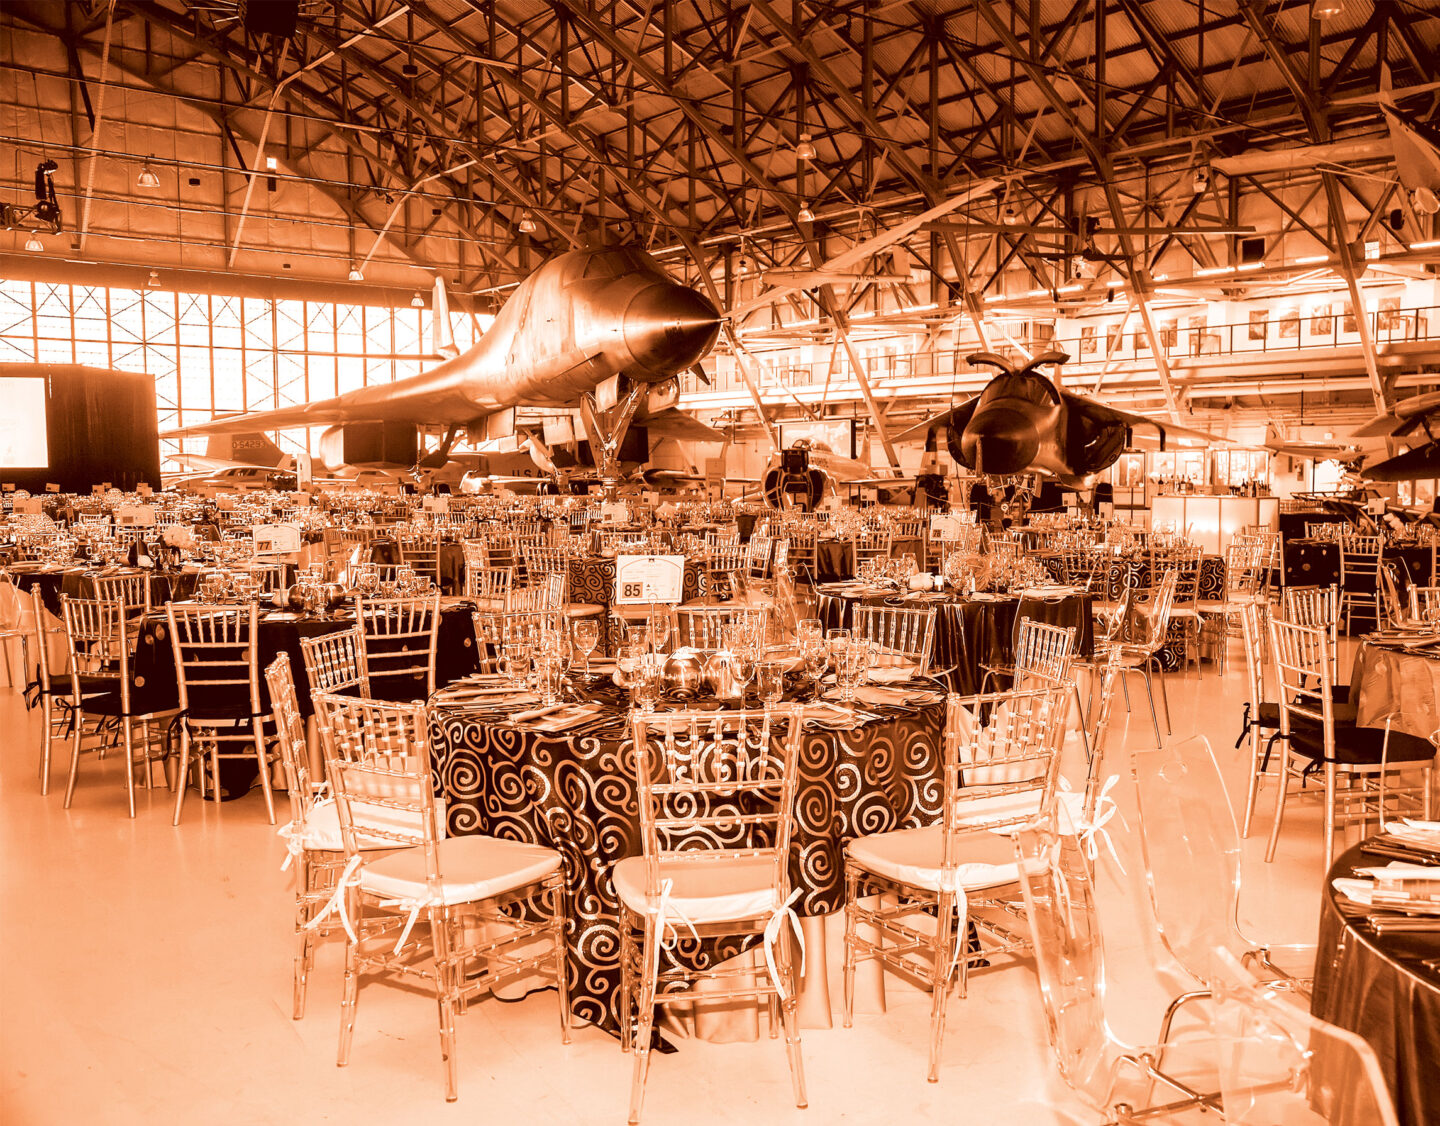 Hangar full of tables and chairs for private event